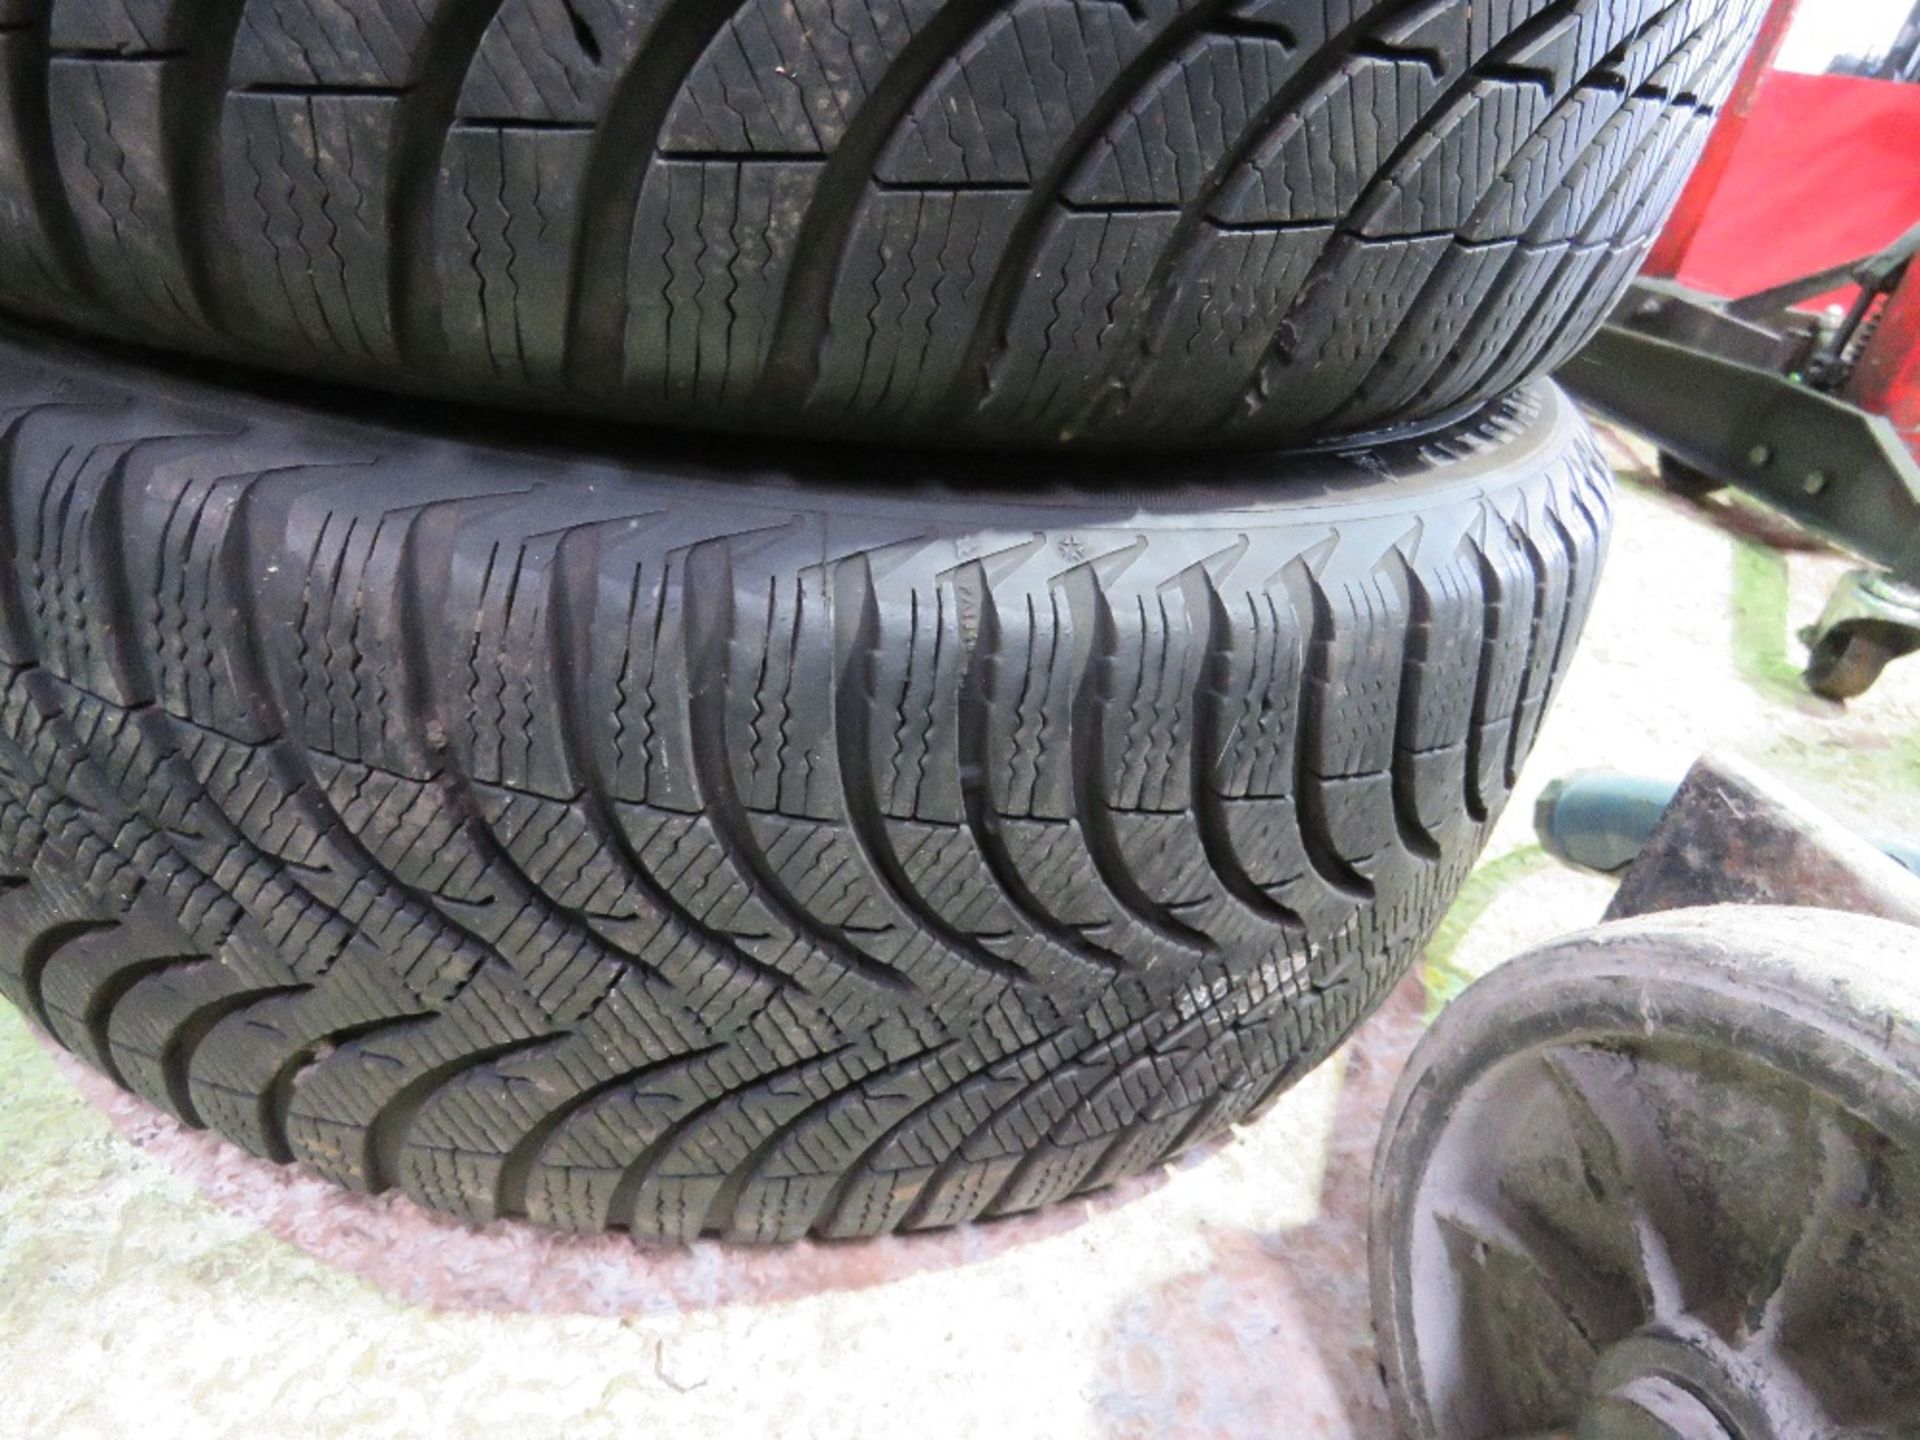 SET OF 4NO ENZO 225-45/17 ALLOY WHEELS AND TYRES, SNOW / WINTER TYRES FITTED. - Image 5 of 9